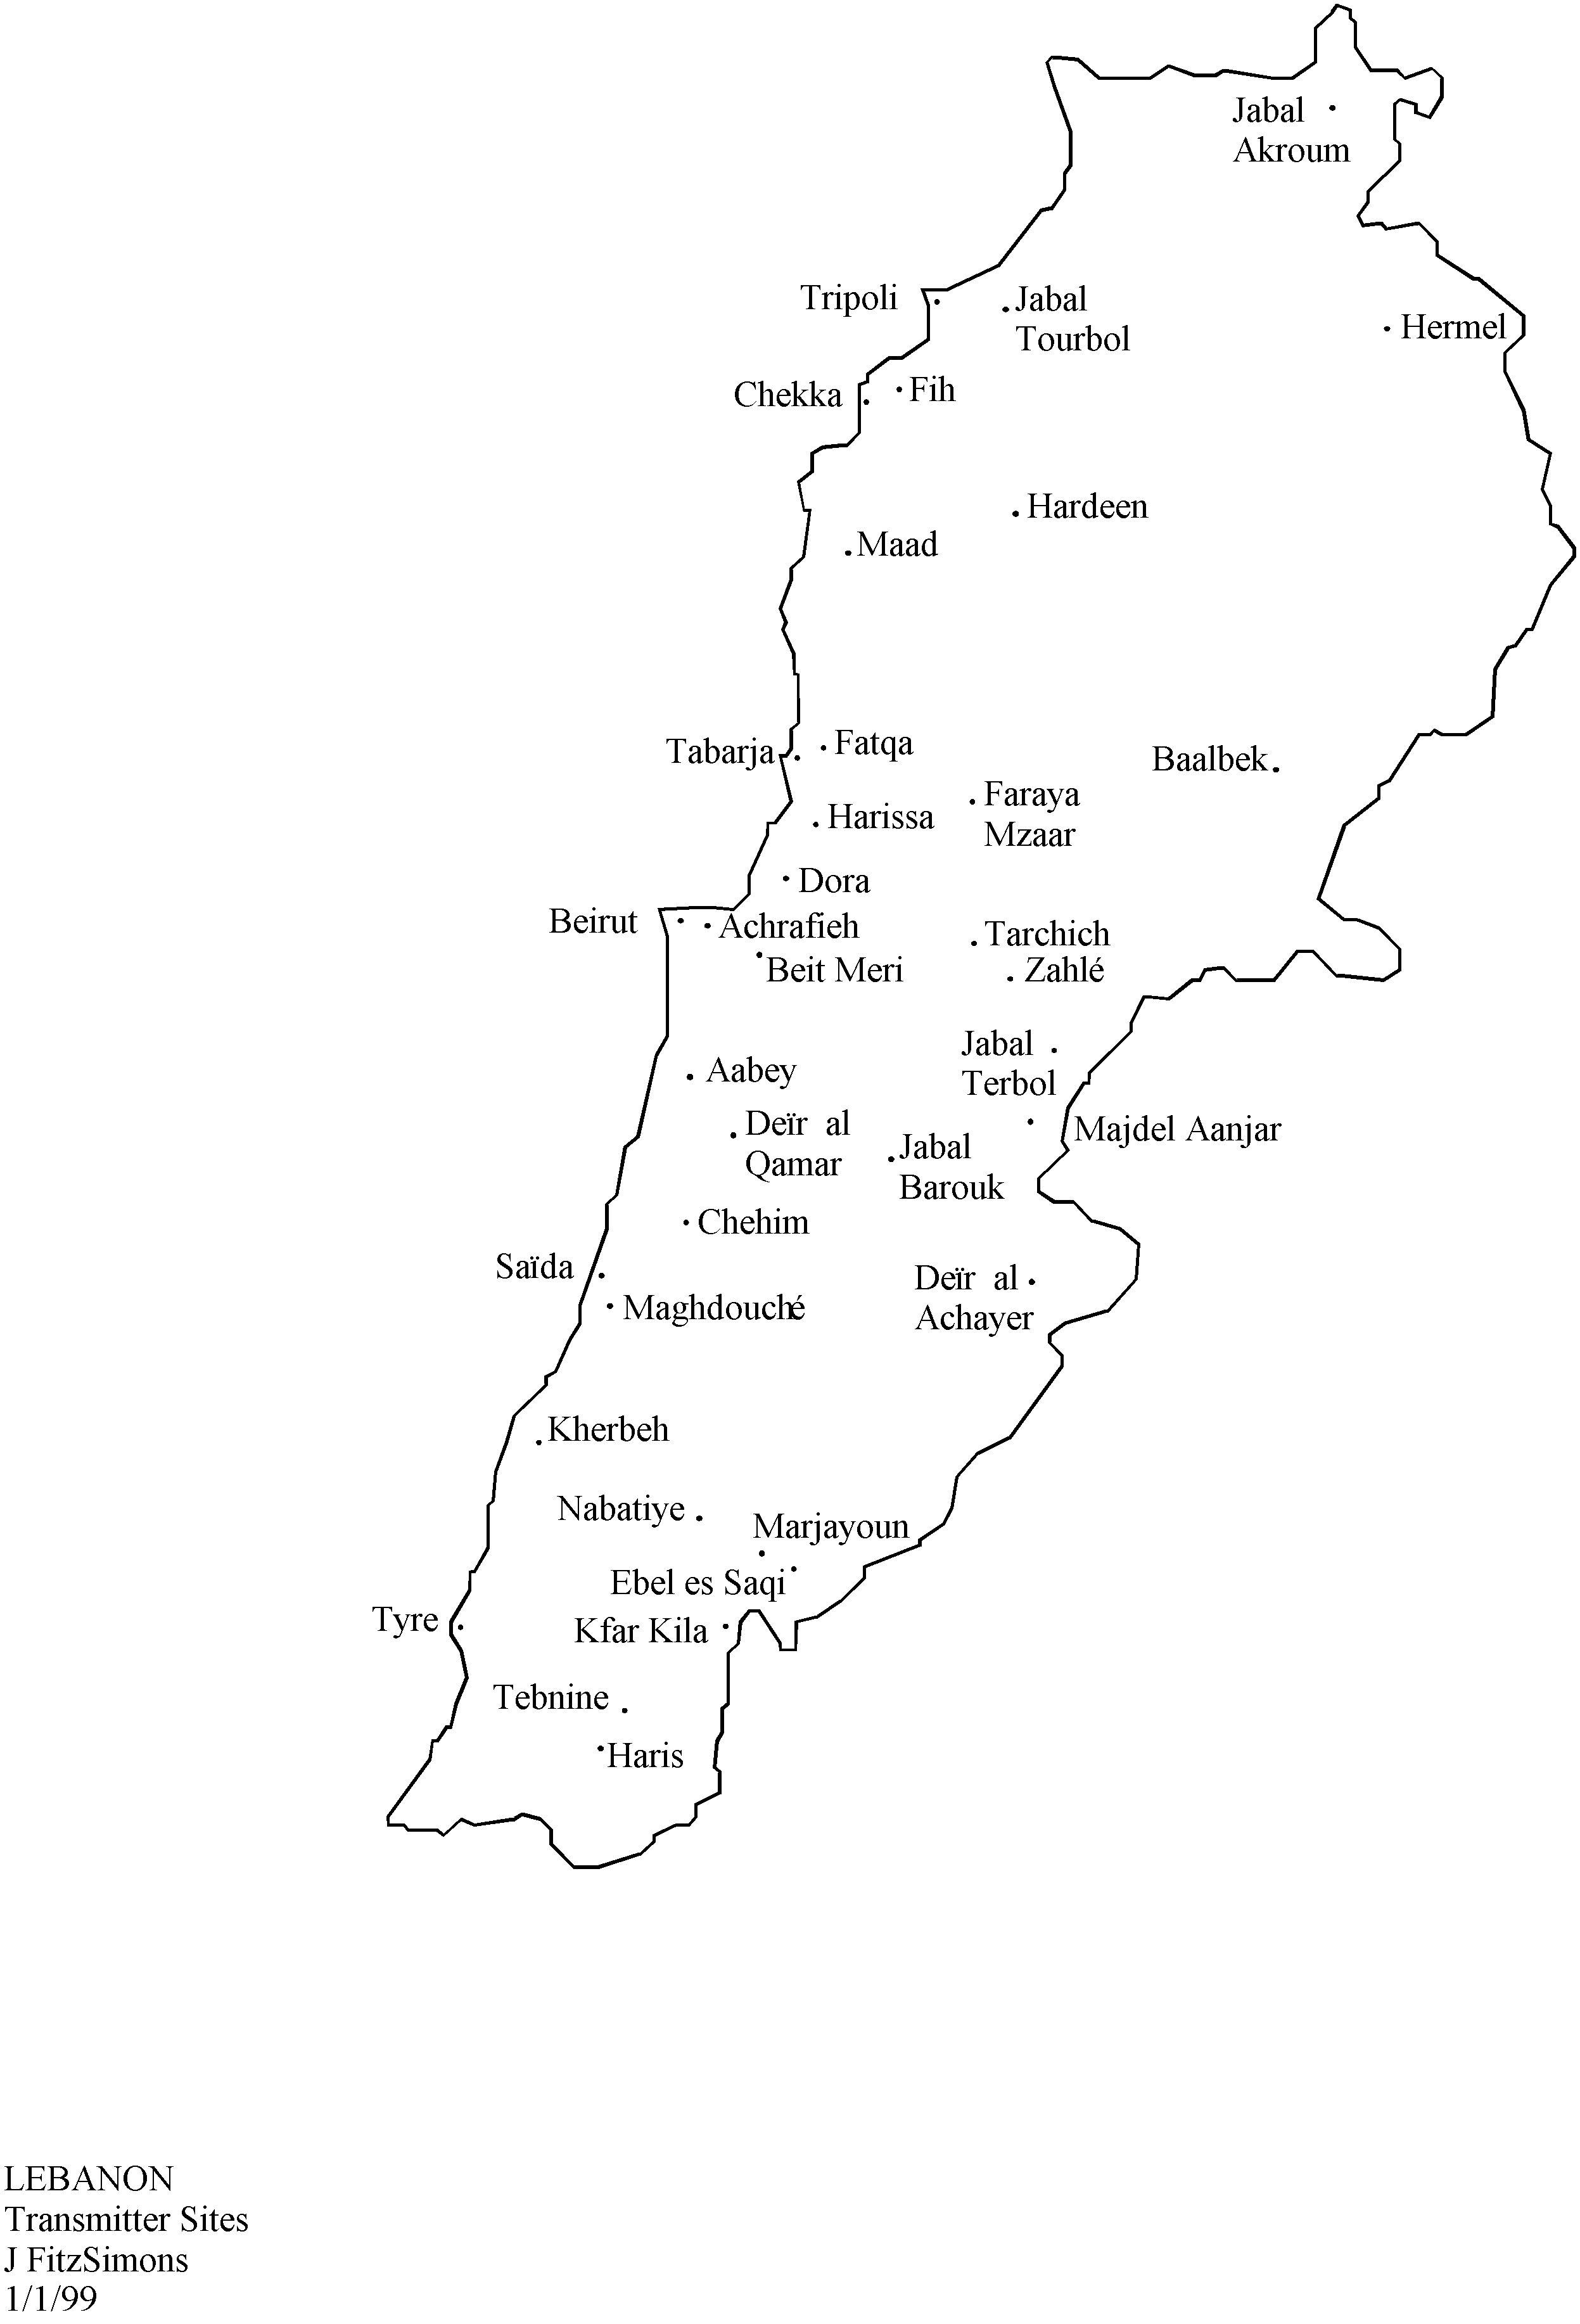 A map of transmitter locations in Lebanon